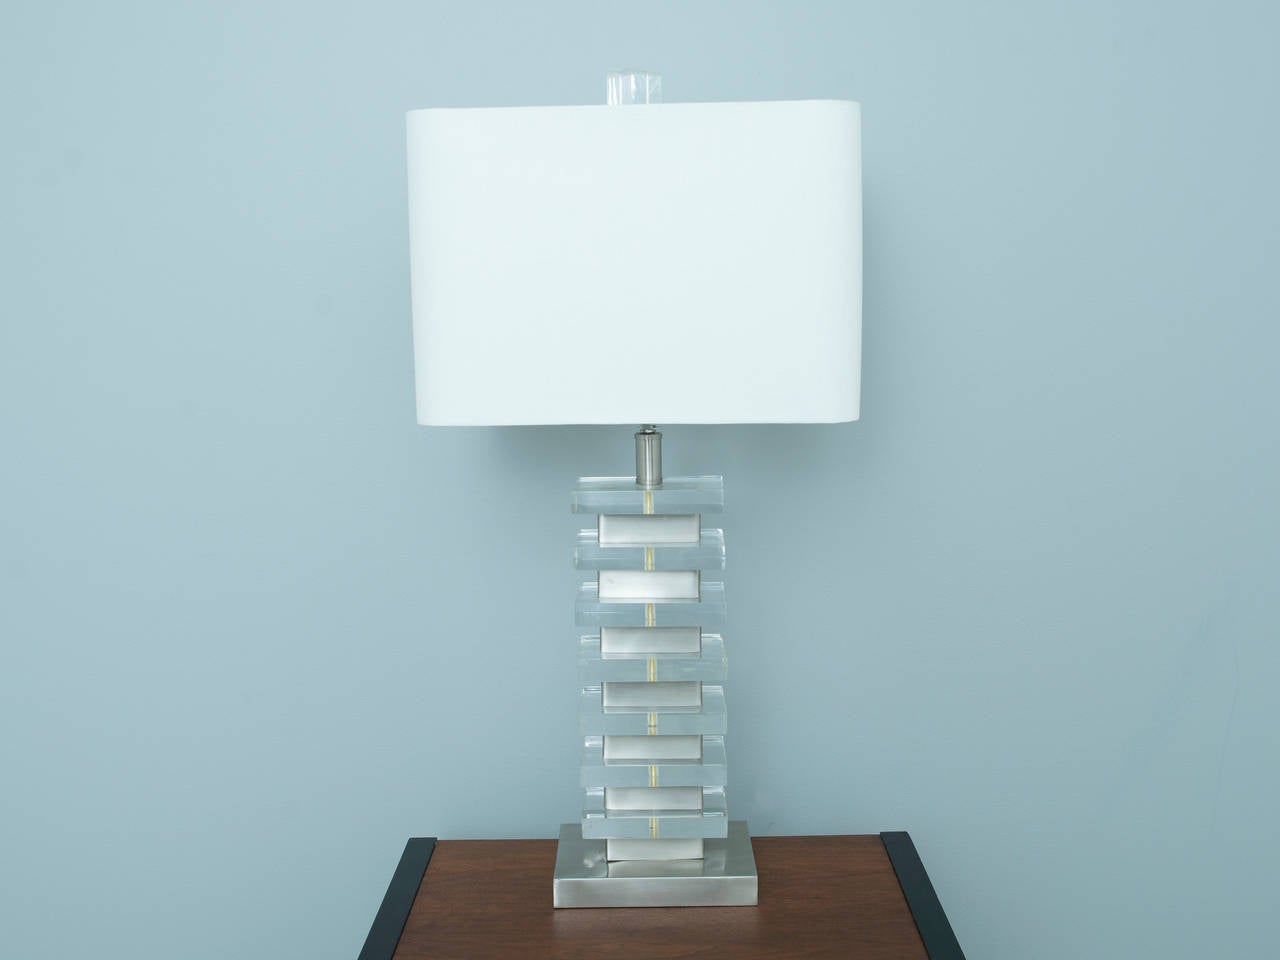 Lucite block table lamp with new shade matching original lucite finial.